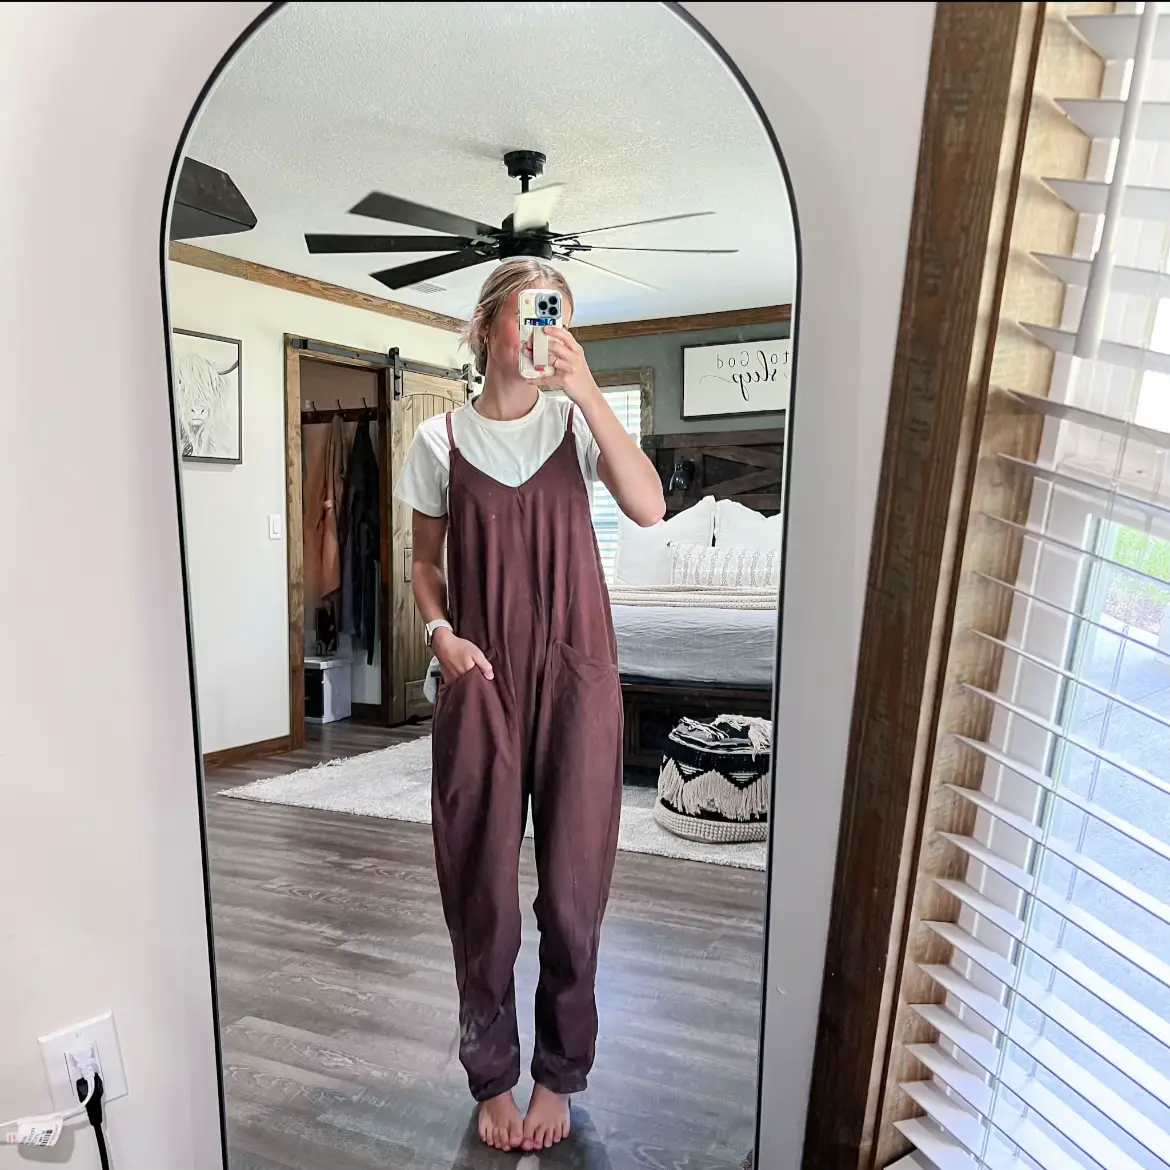 Aurola US on Instagram: Did you try this new Basic romper? Any  suggestions?🥰